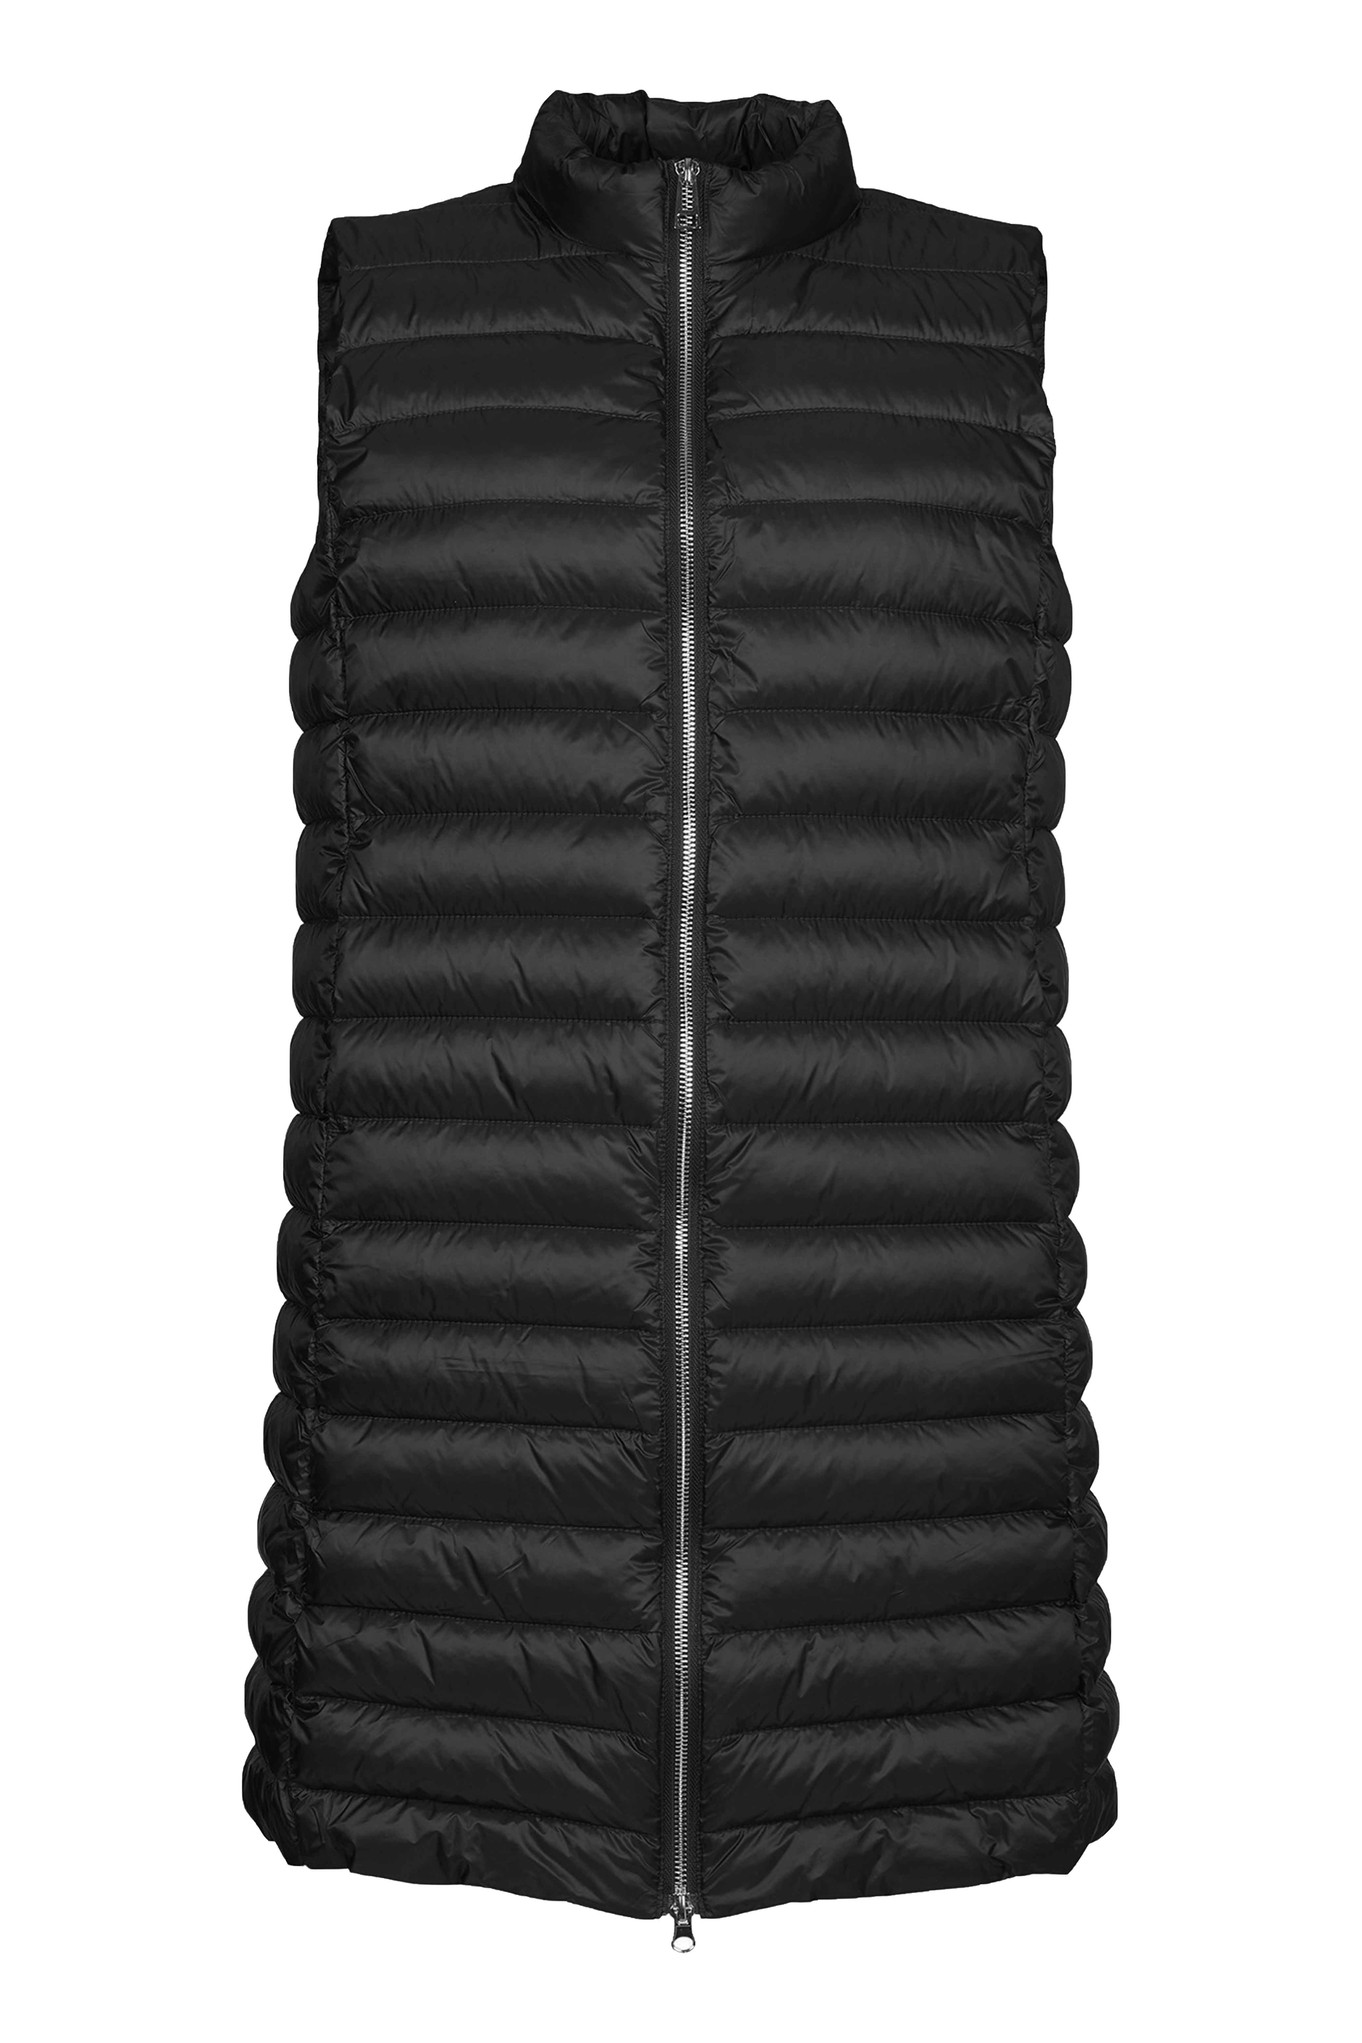 Sunday Polly Longline Quilted Gilet